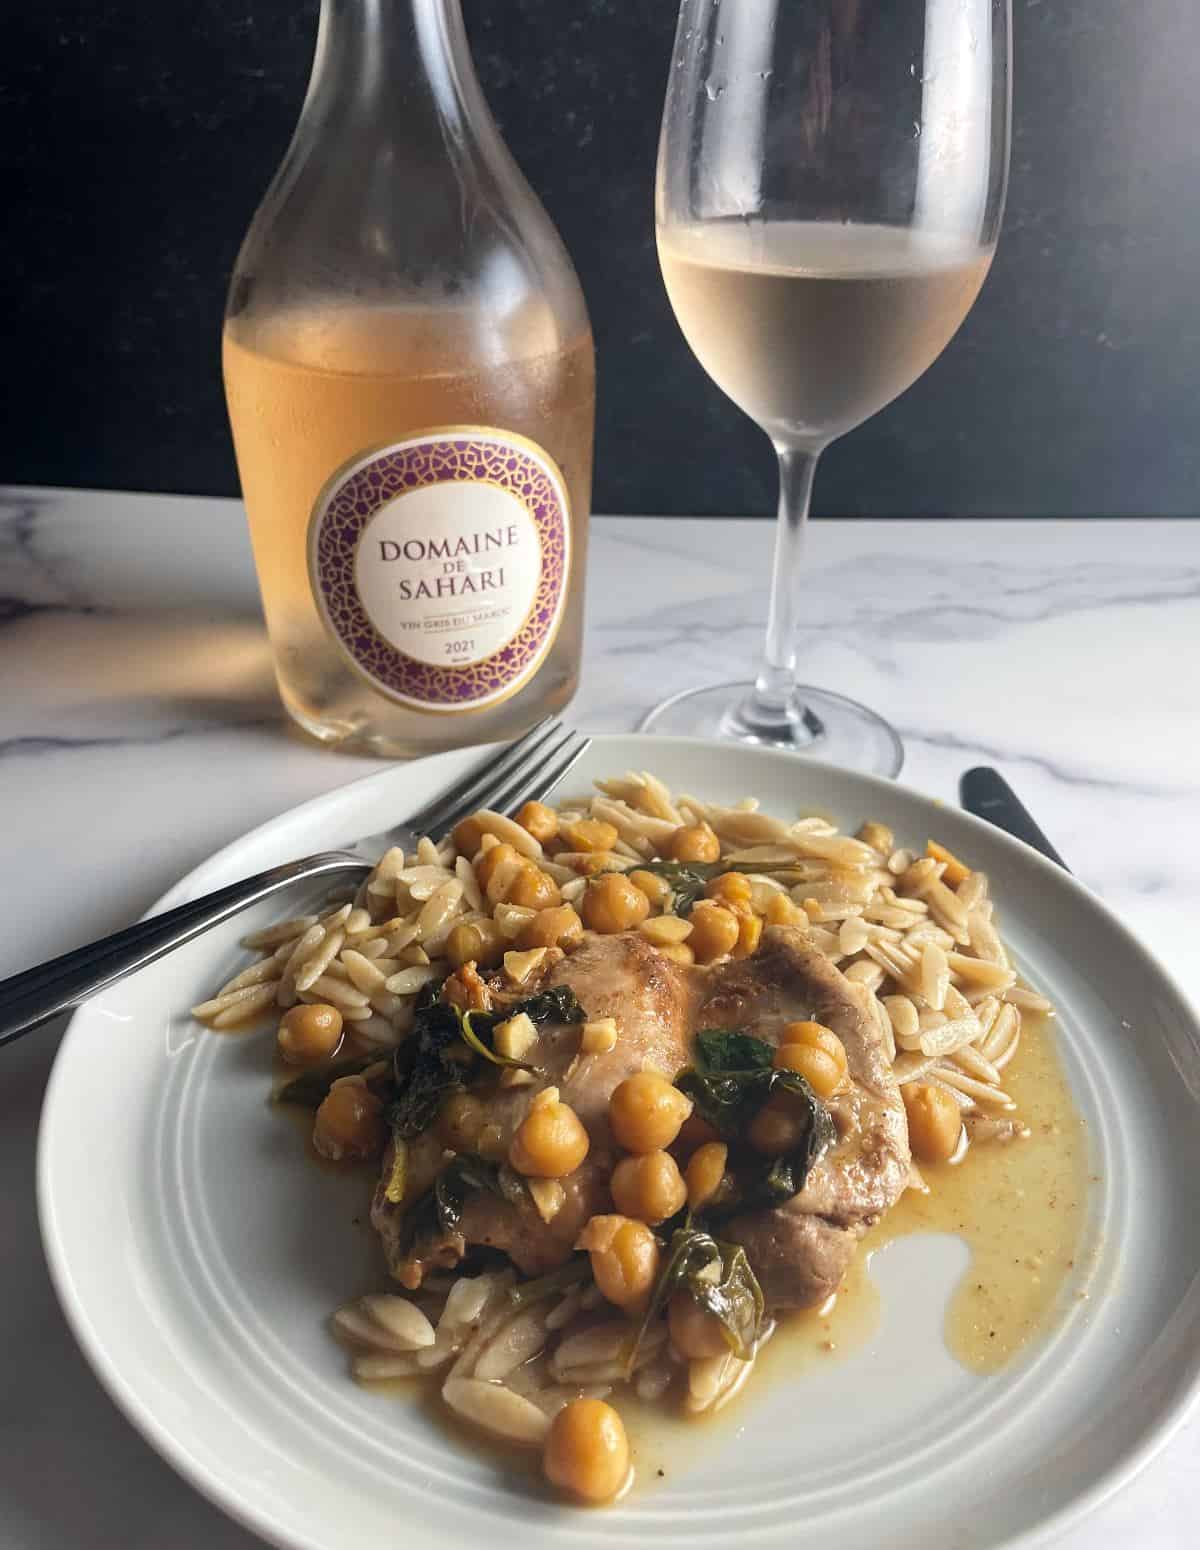 Moroccan chicken thighs and chickpeas plated with orzo and served with a Moroccan rosé wine.